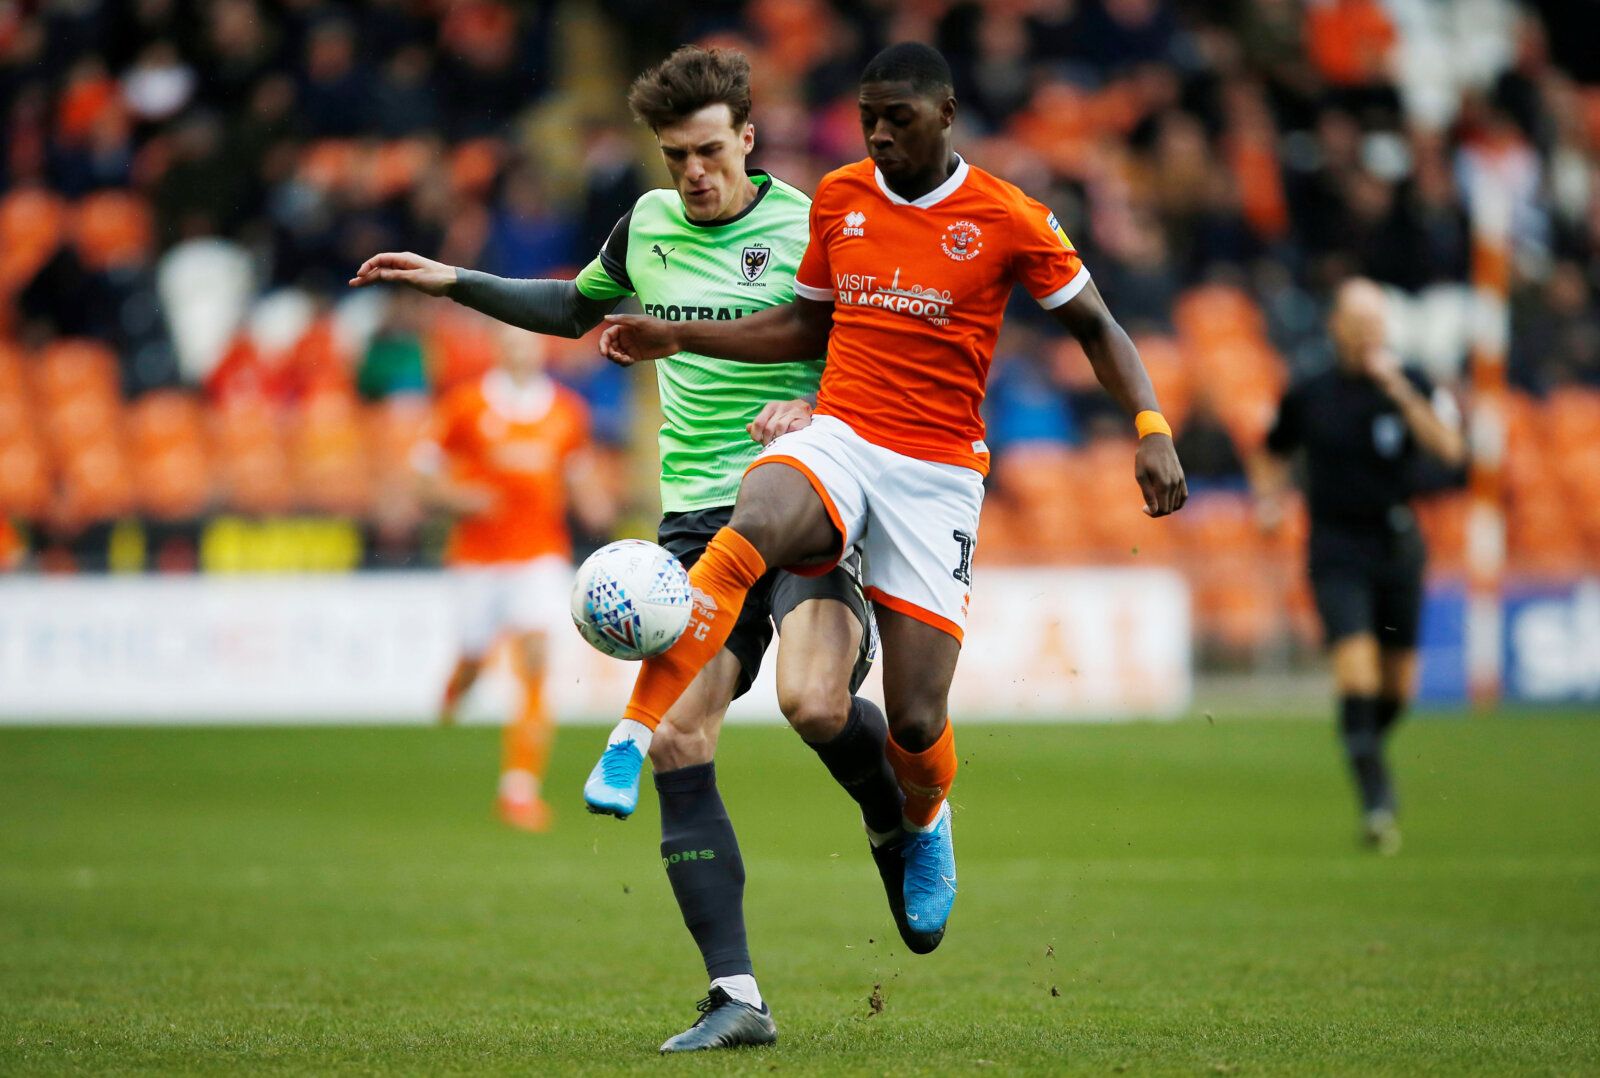 Soccer Football - League One - Blackpool v AFC Wimbledon - Bloomfield Road, Blackpool, Britain - November 16, 2019   AFC Wimbledon's Ryan Delaney in action with Blackpool's Sullay Kaikai   Action Images/Craig Brough    EDITORIAL USE ONLY. No use with unauthorized audio, video, data, fixture lists, club/league logos or 